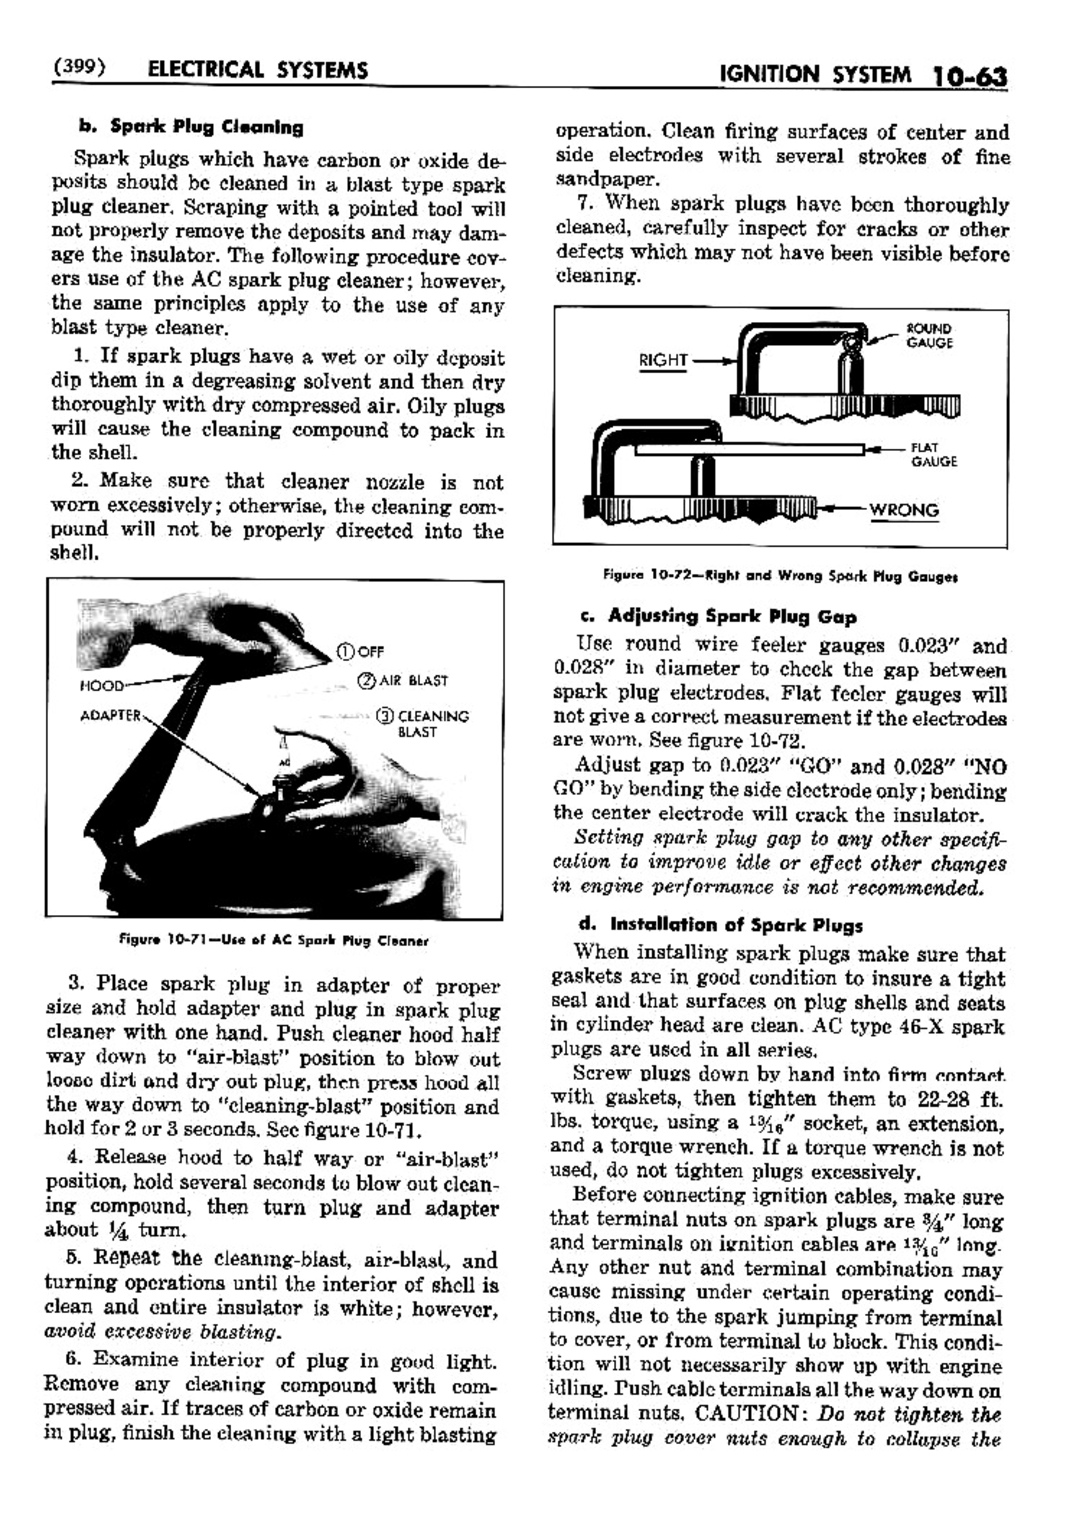 n_11 1952 Buick Shop Manual - Electrical Systems-063-063.jpg